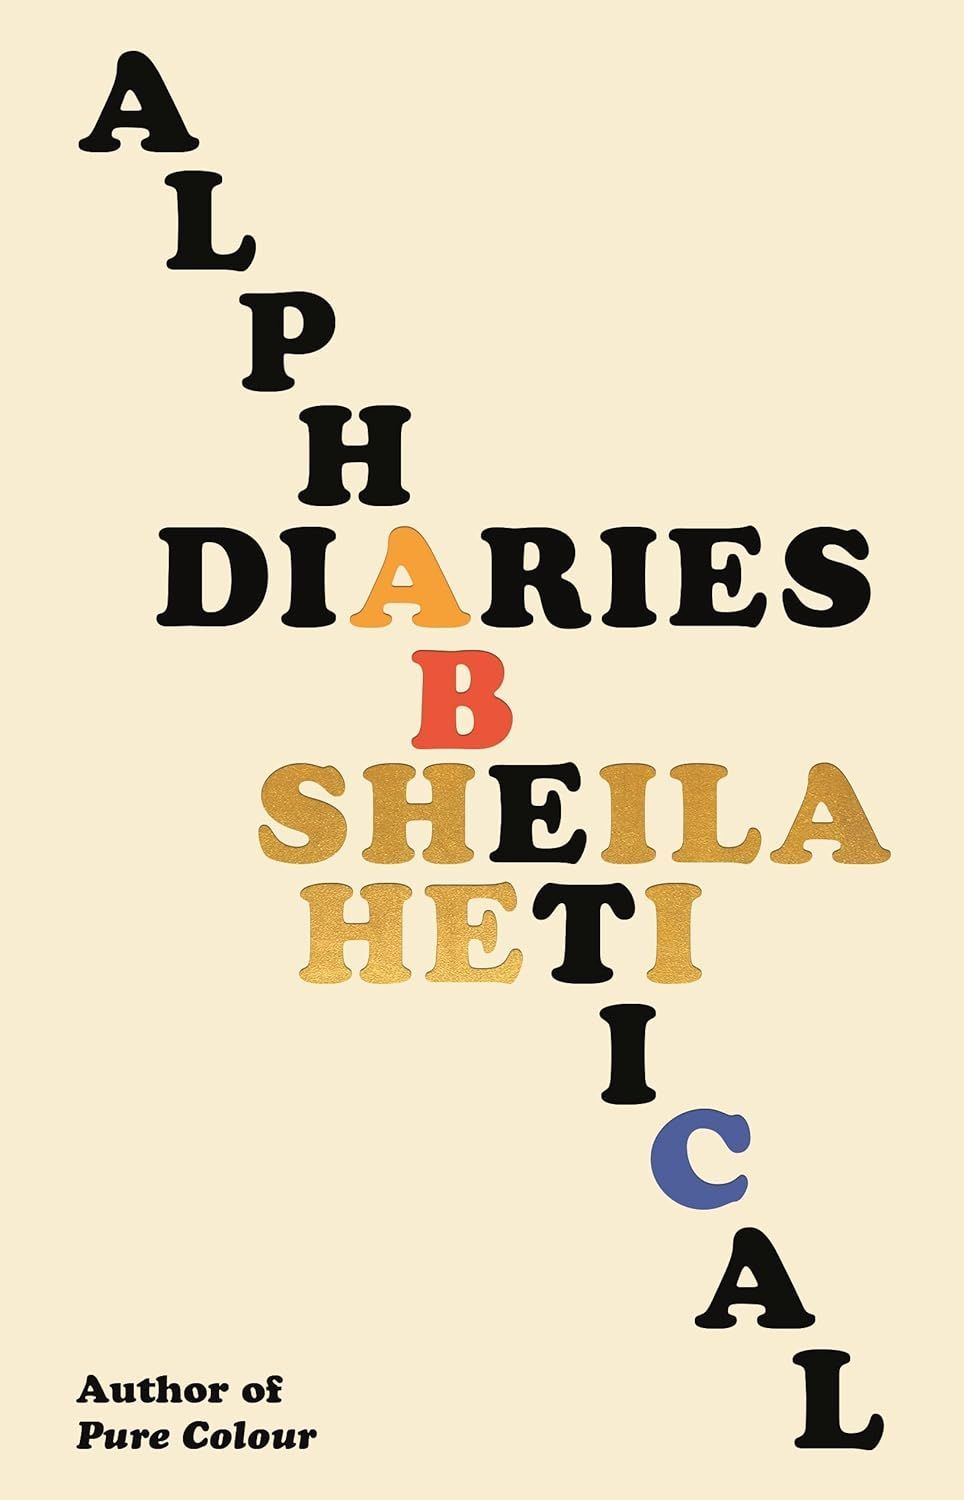 Making Meaning out of Randomness: On Sheila Heti’s “Alphabetical Diaries”